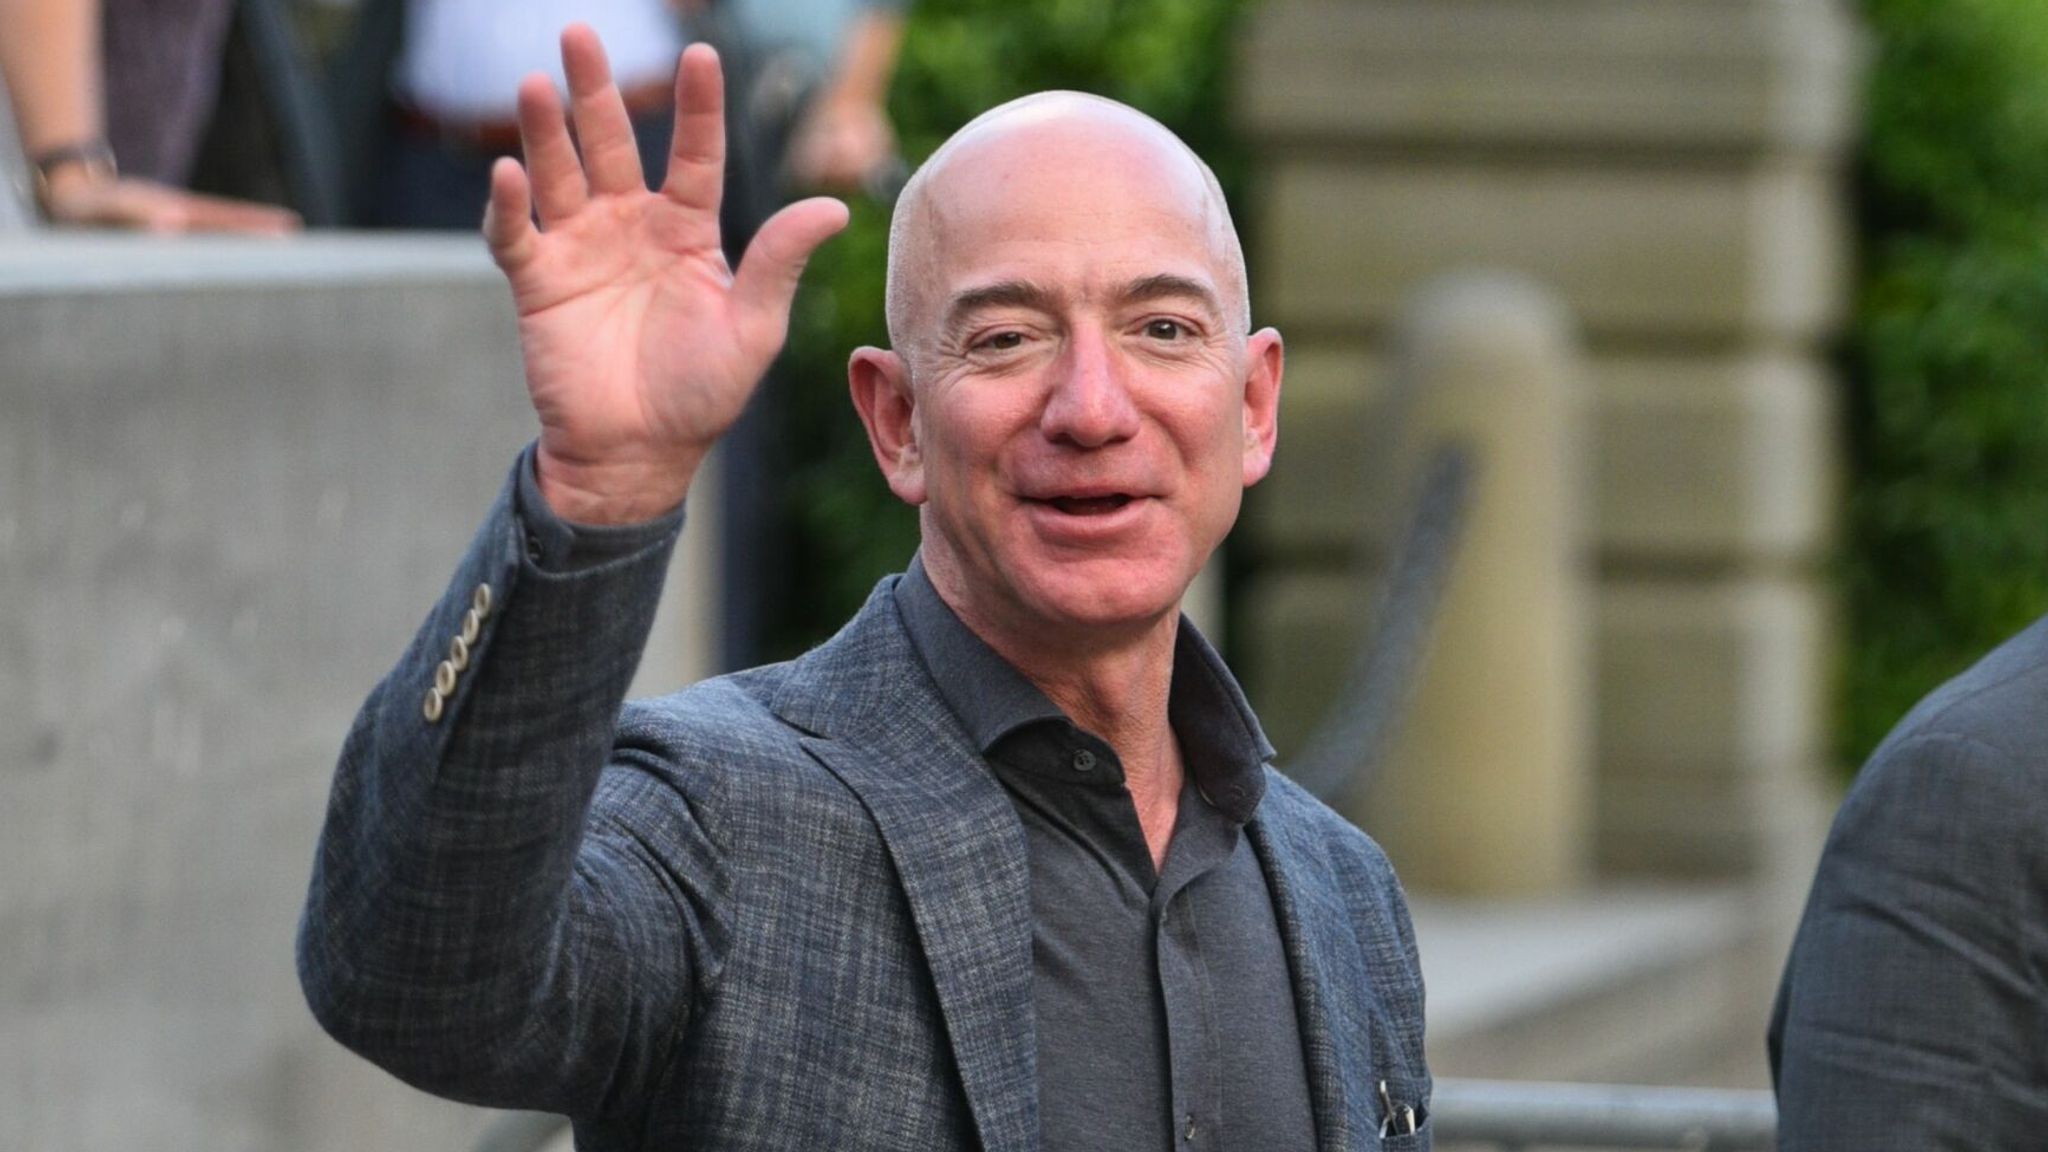 Top 10 Richest People of the World